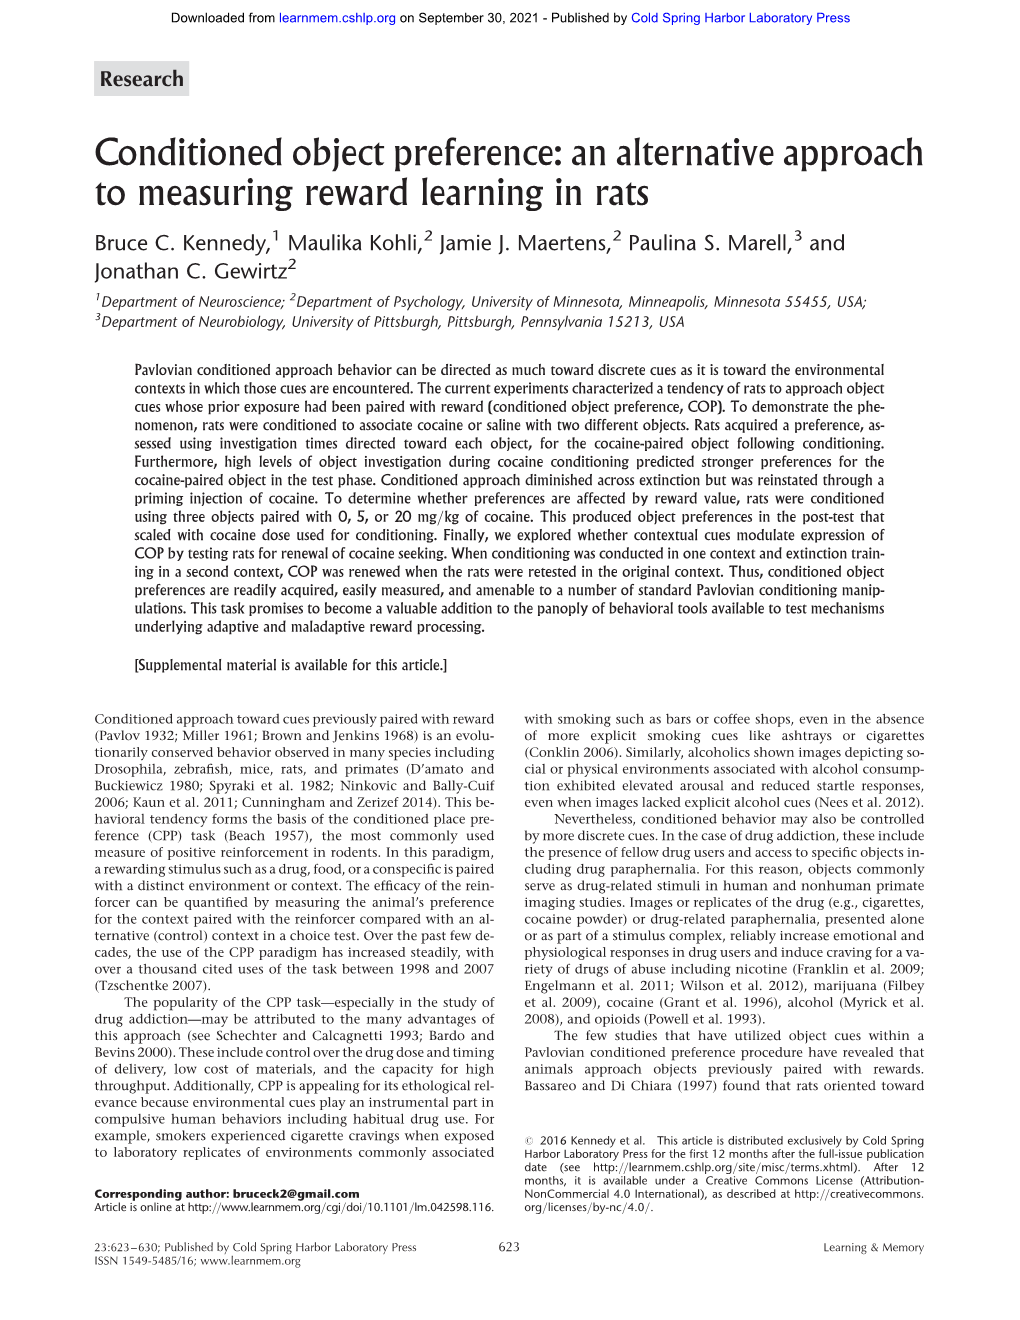 Conditioned Object Preference: an Alternative Approach to Measuring Reward Learning in Rats